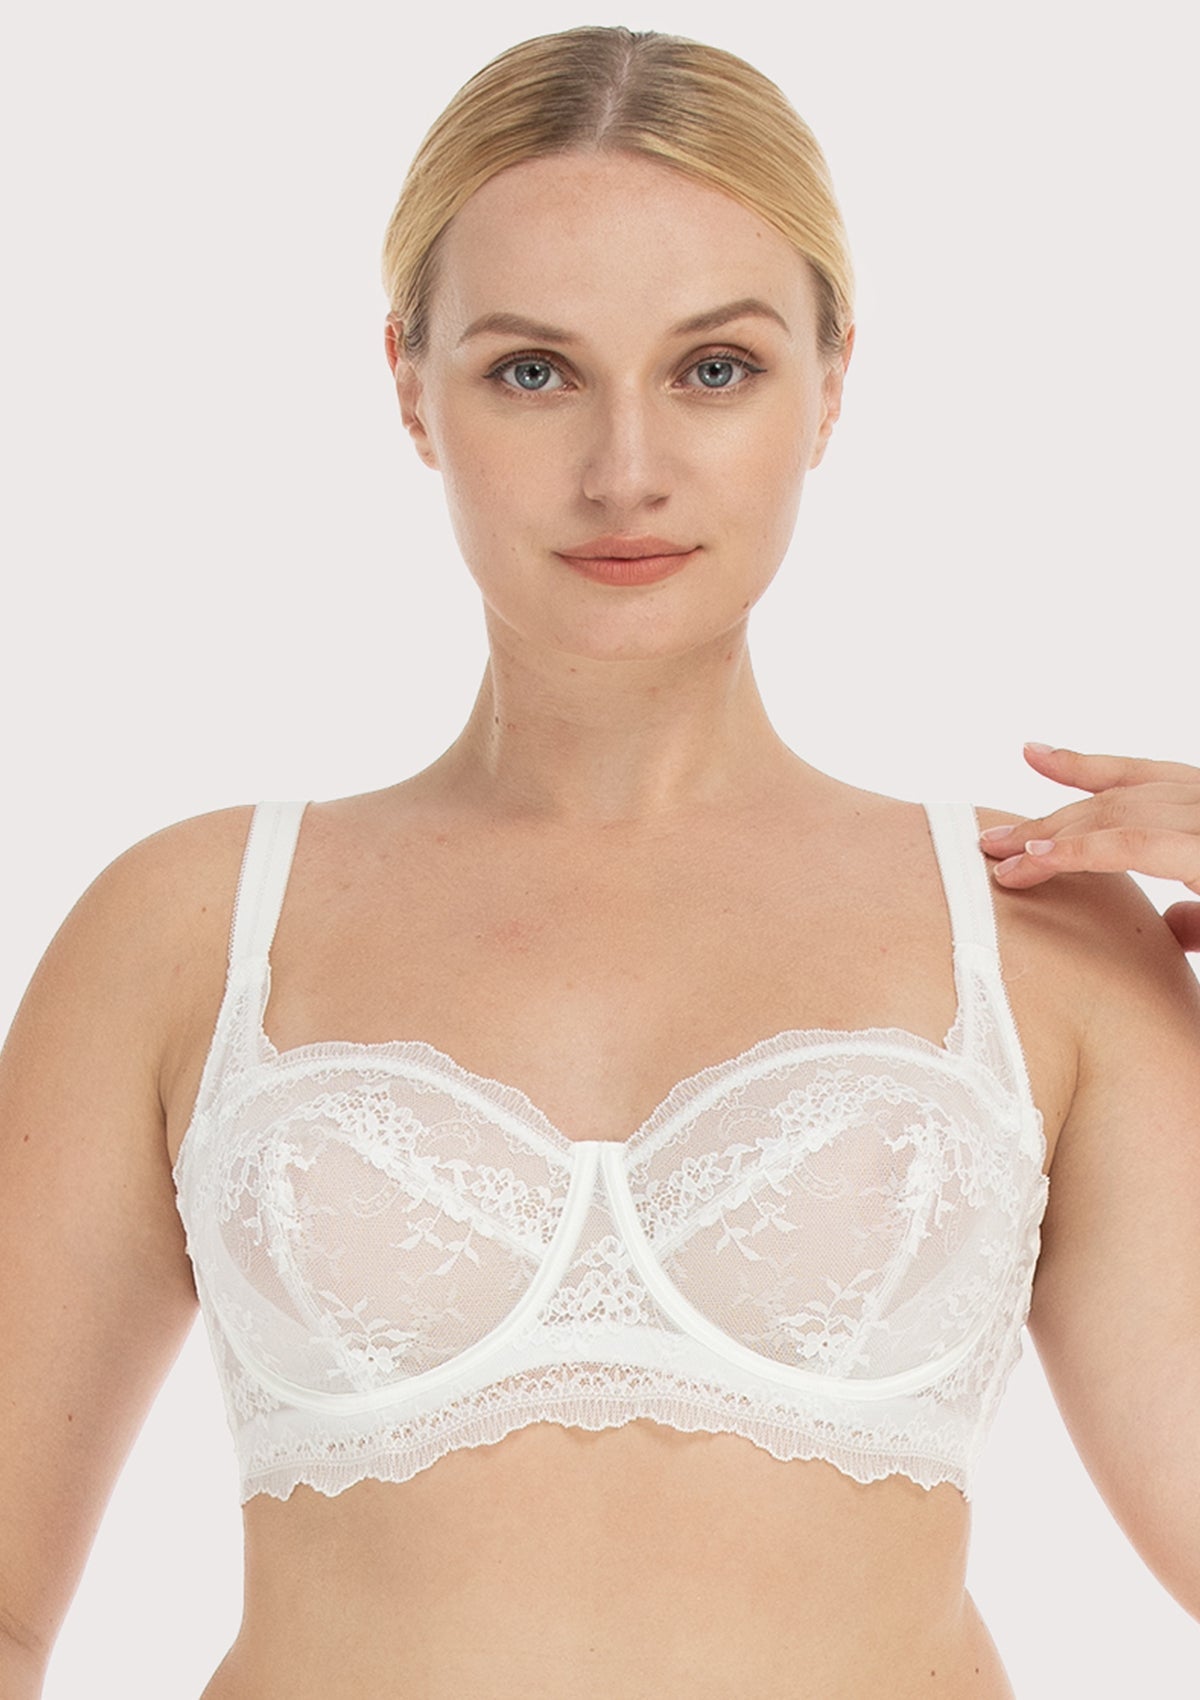 HSIA I Do Floral Lace Bridal Balconette Beautiful Bra For Special Day - White / 34 / D